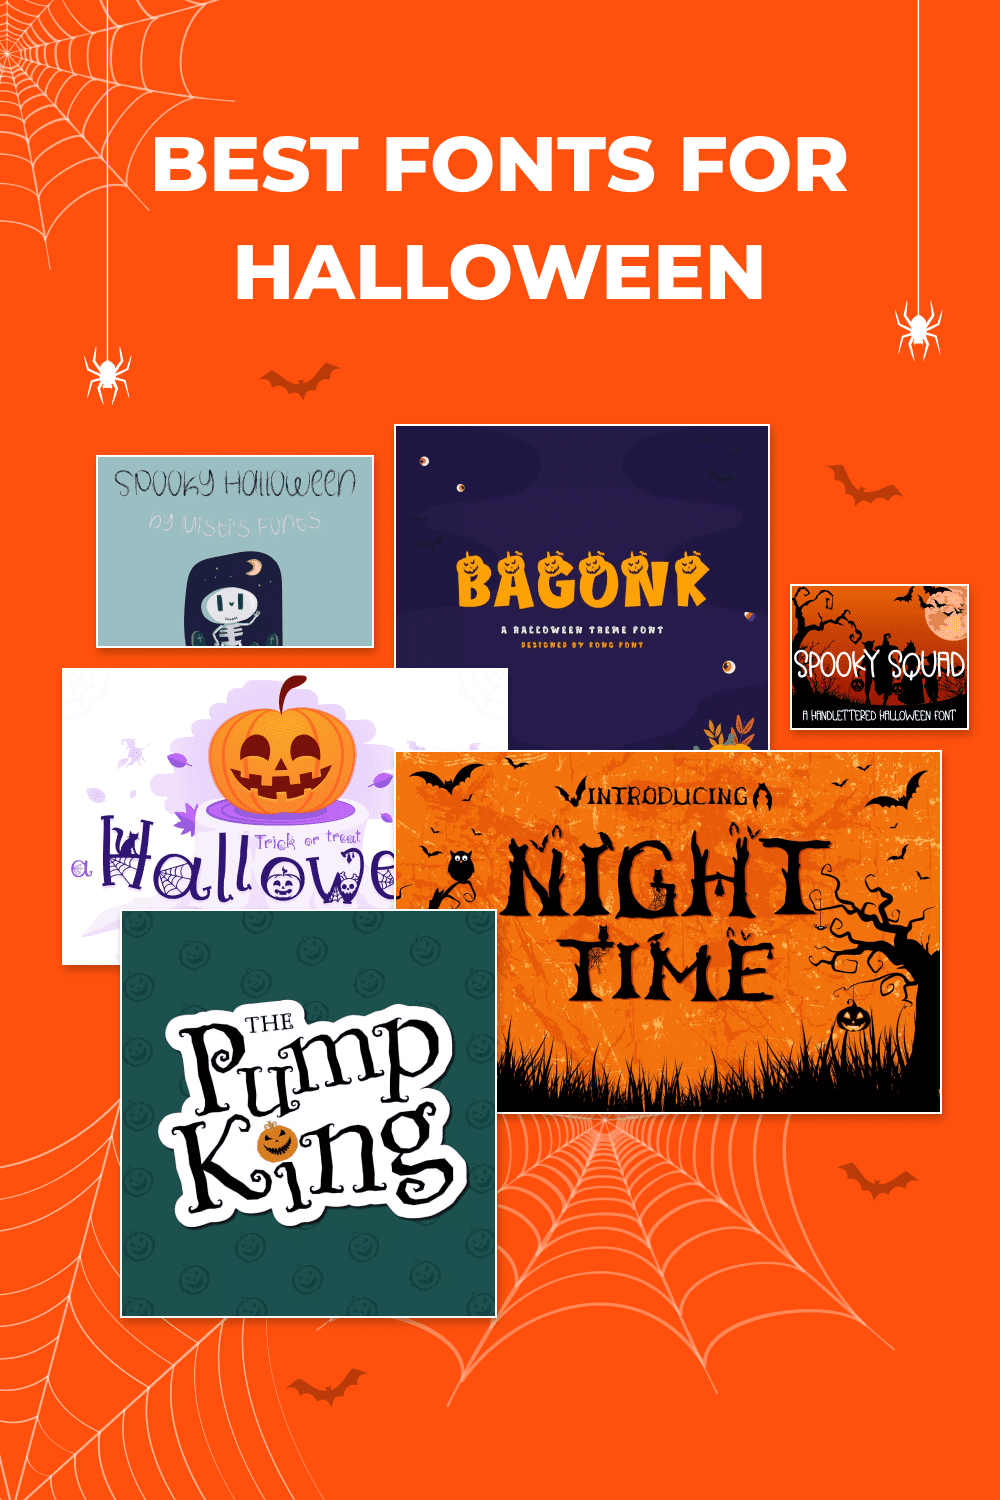 Halloween Fonts for Your Spooky Designs.